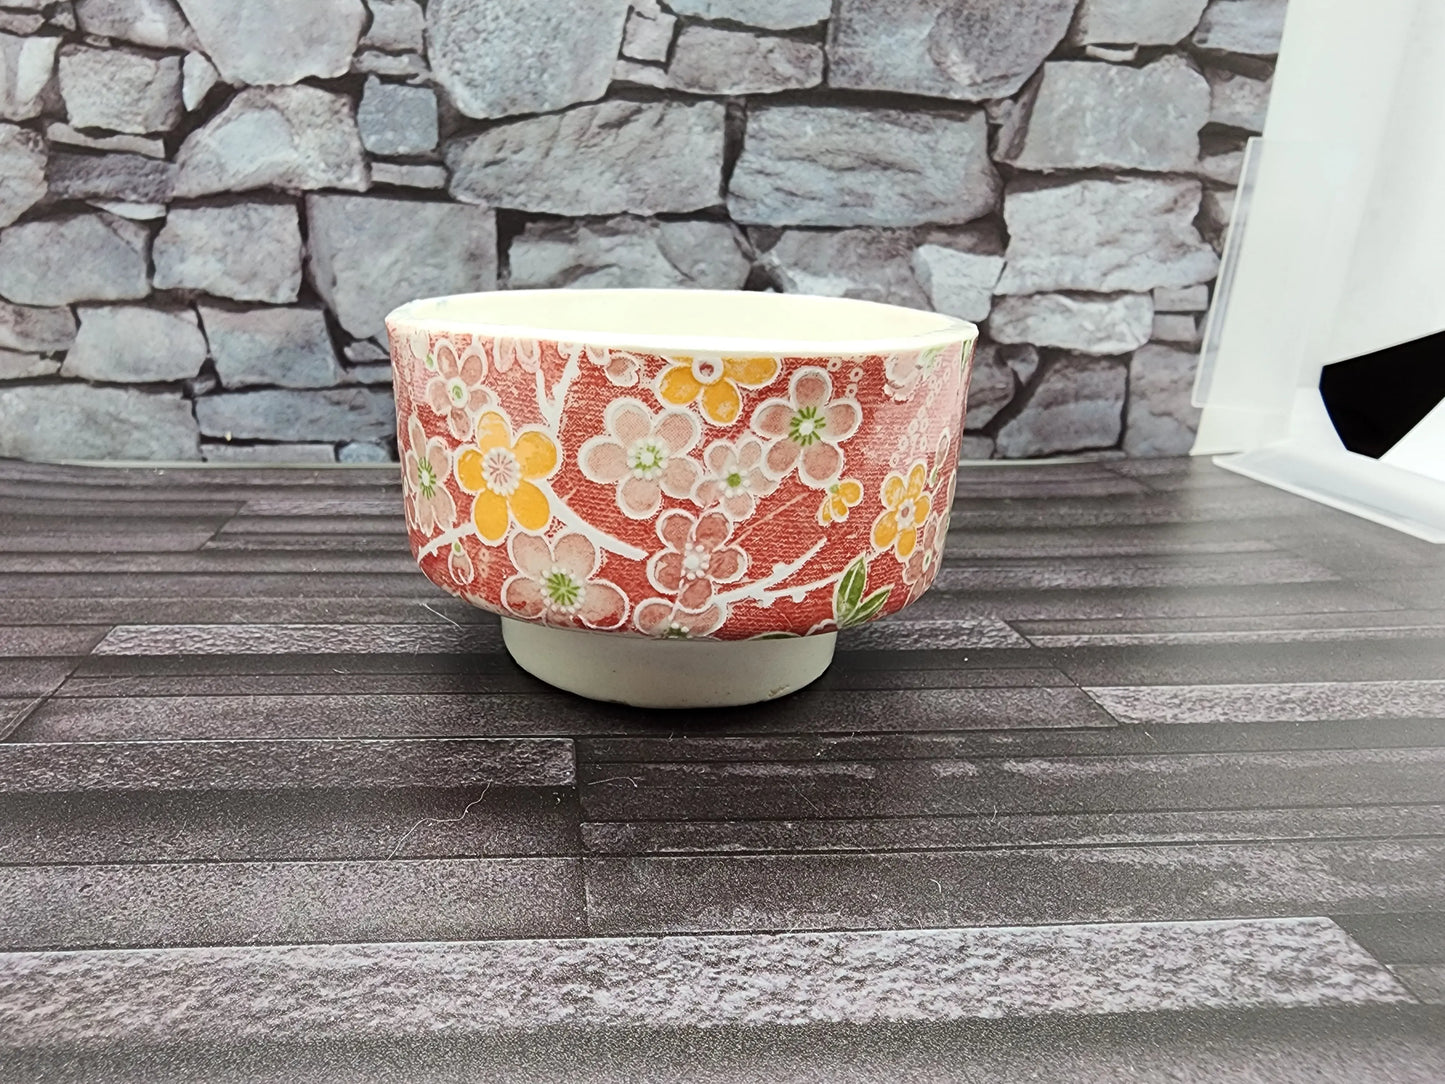 Gong Fu Style Tea cup